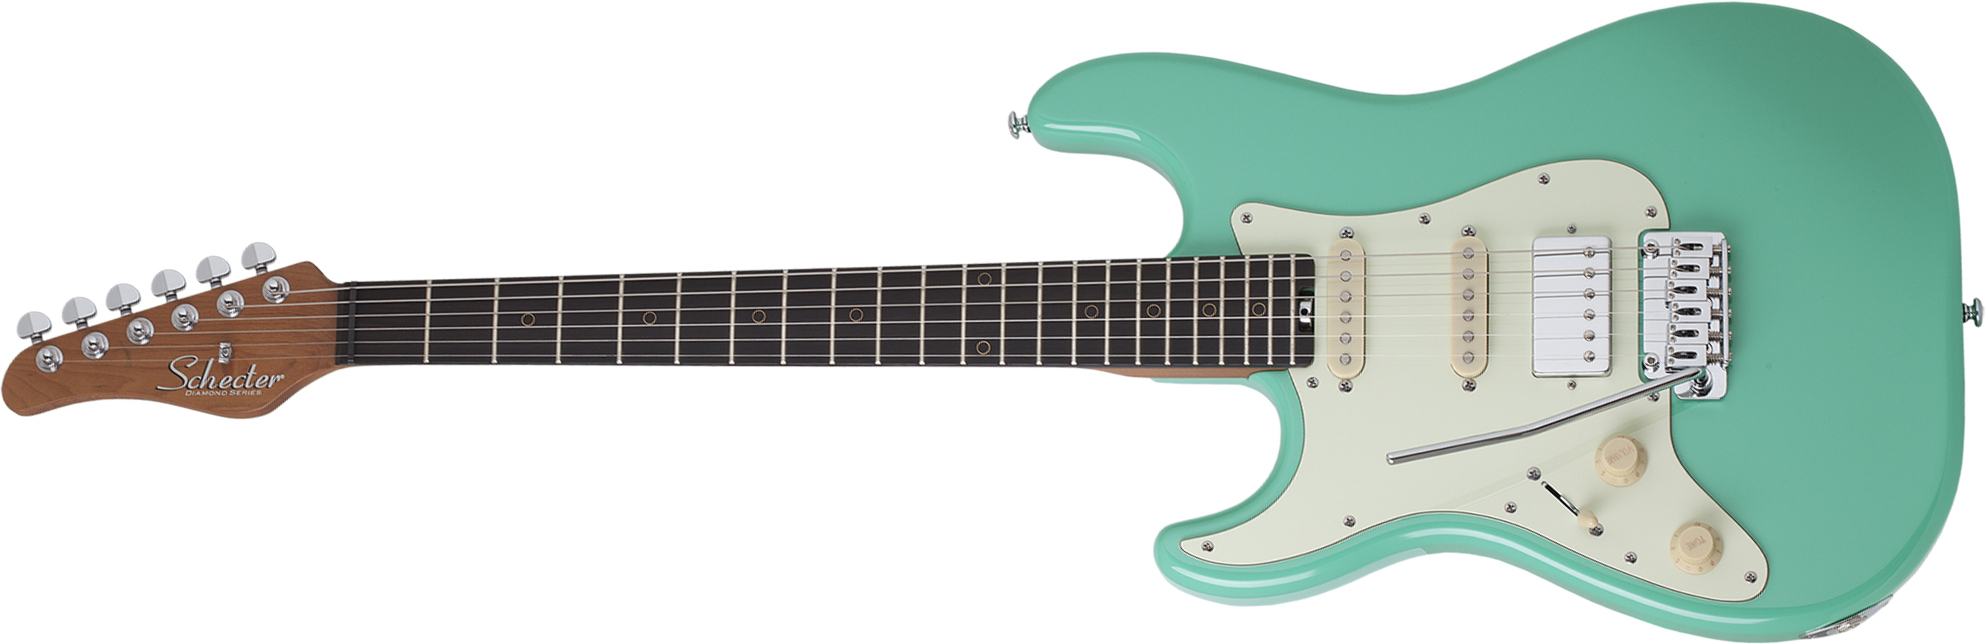 Schecter Nick Johnston Traditional Gaucher Hss Signature Trem Eb - Atomic Green - Left-handed electric guitar - Main picture